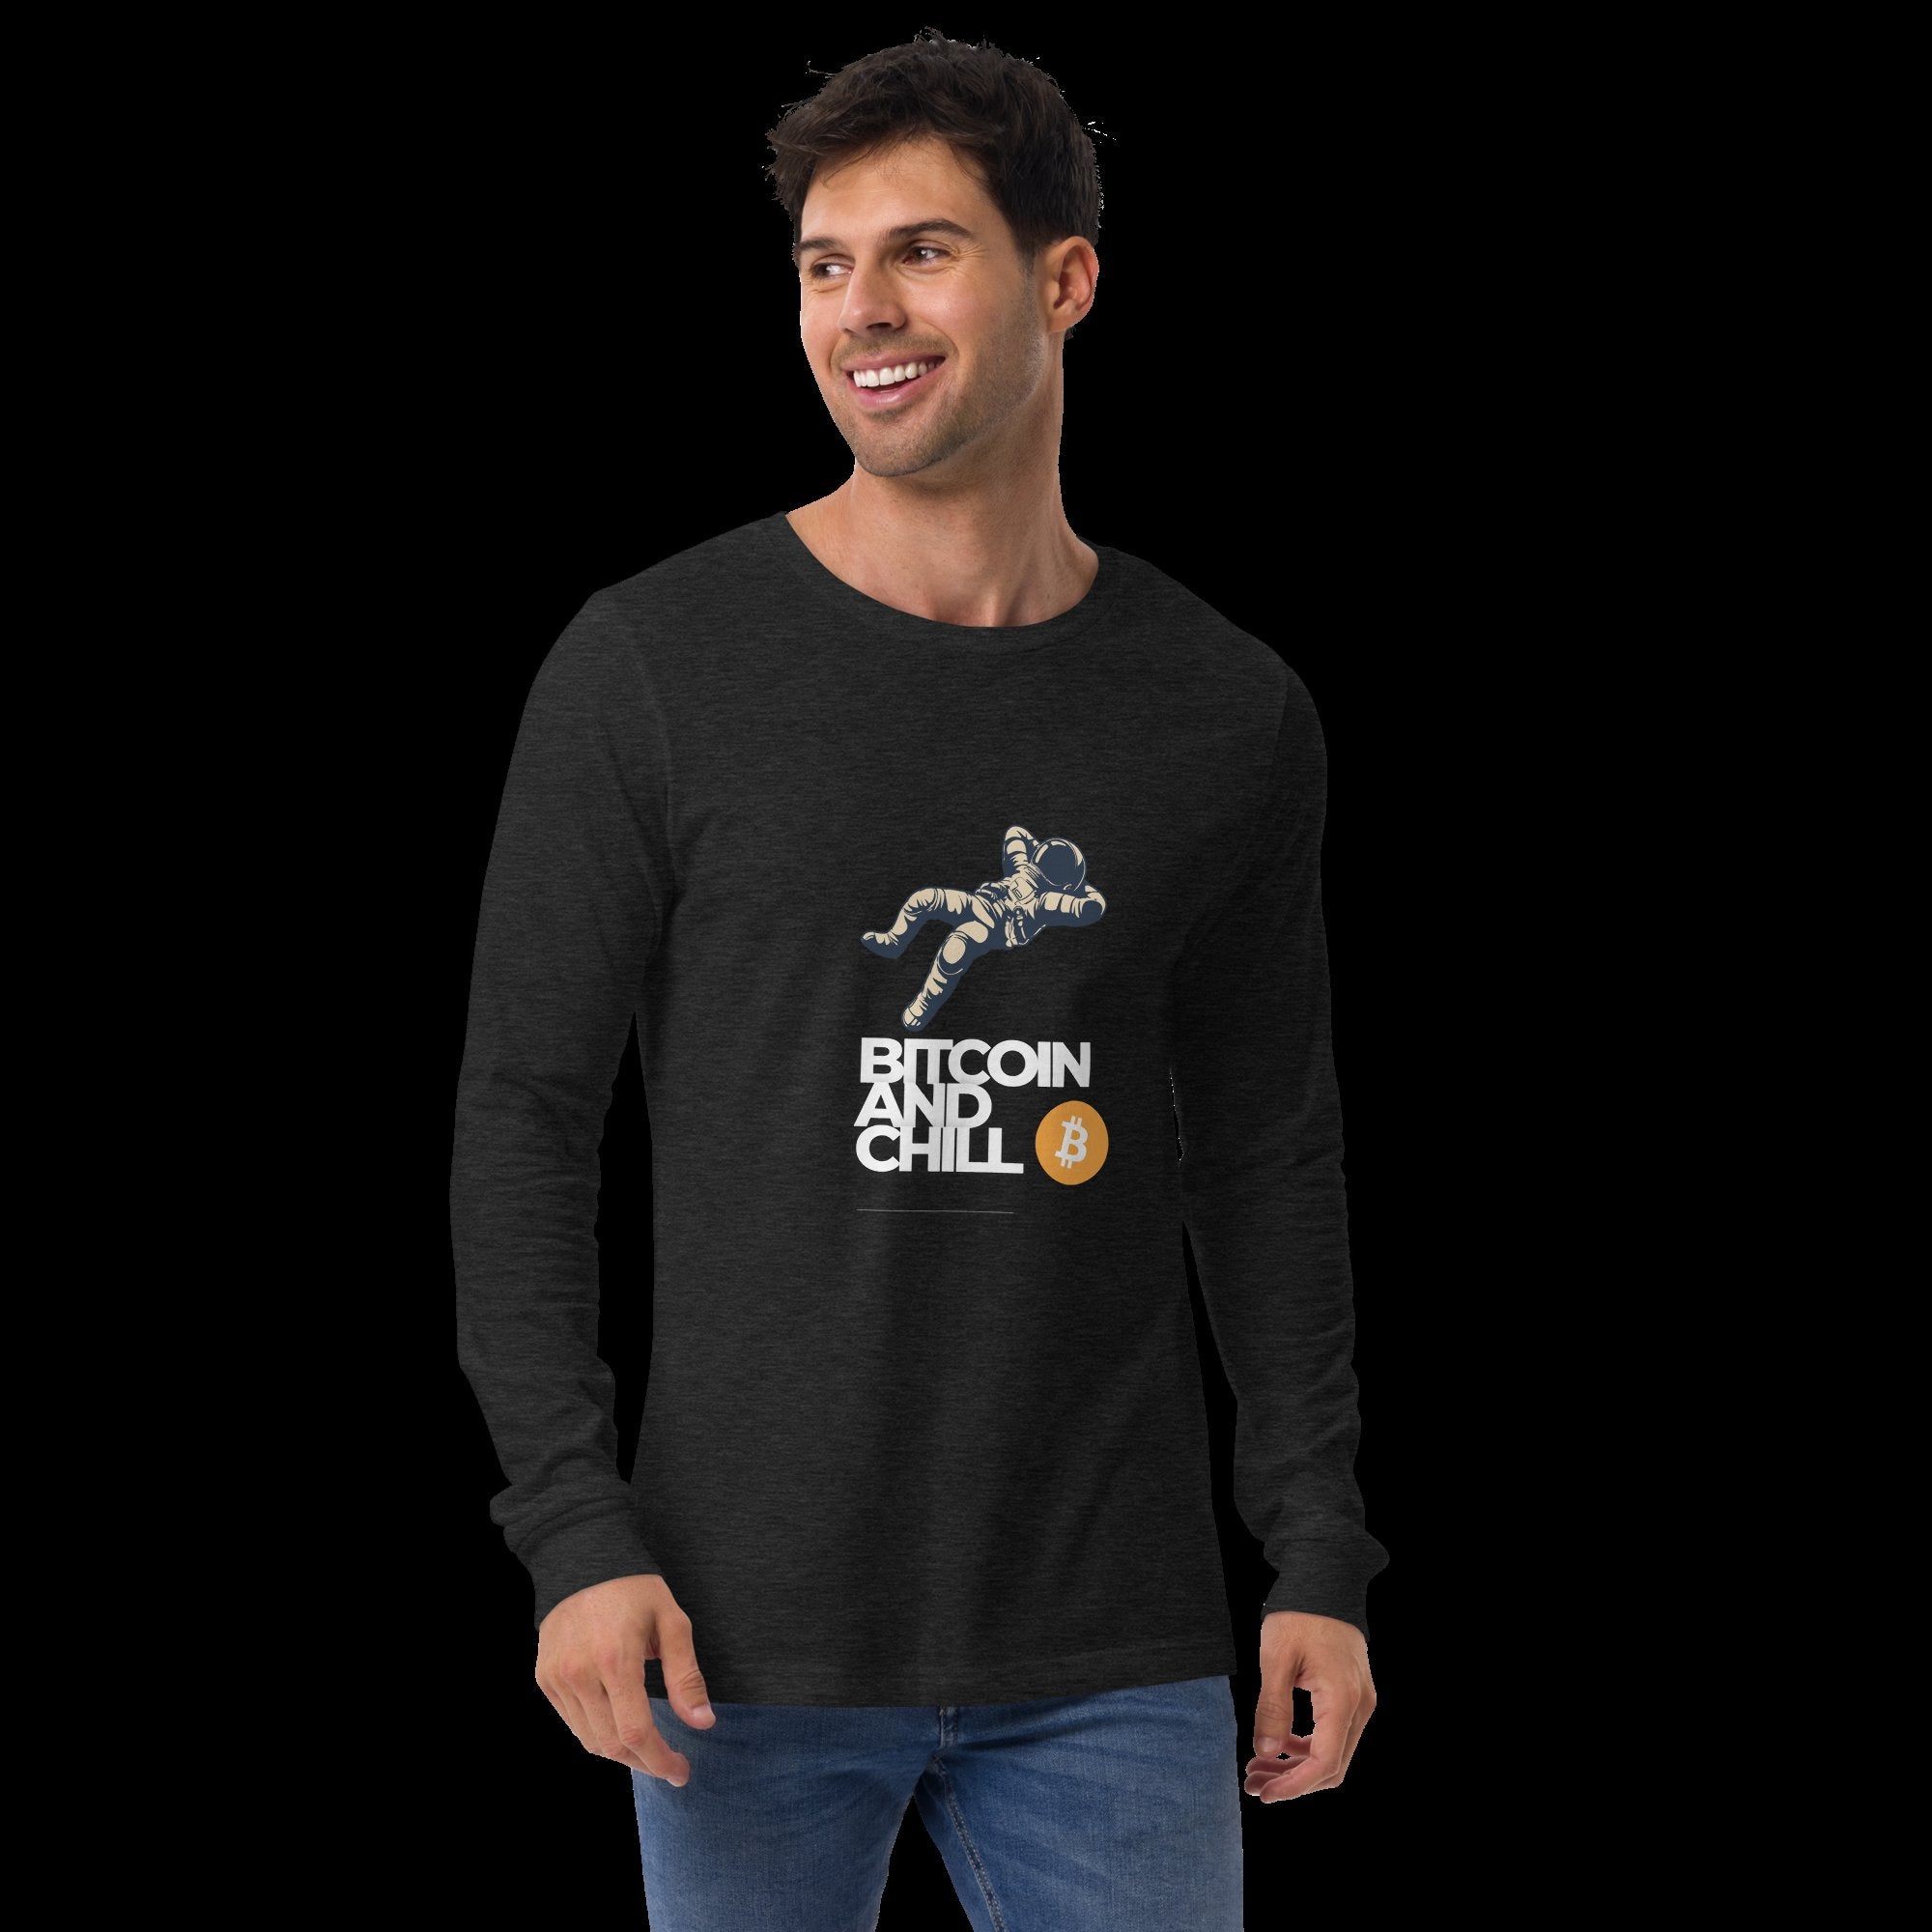 An image of a man wearing a long-sleeve tee that reads, "Bitcoin and chill"